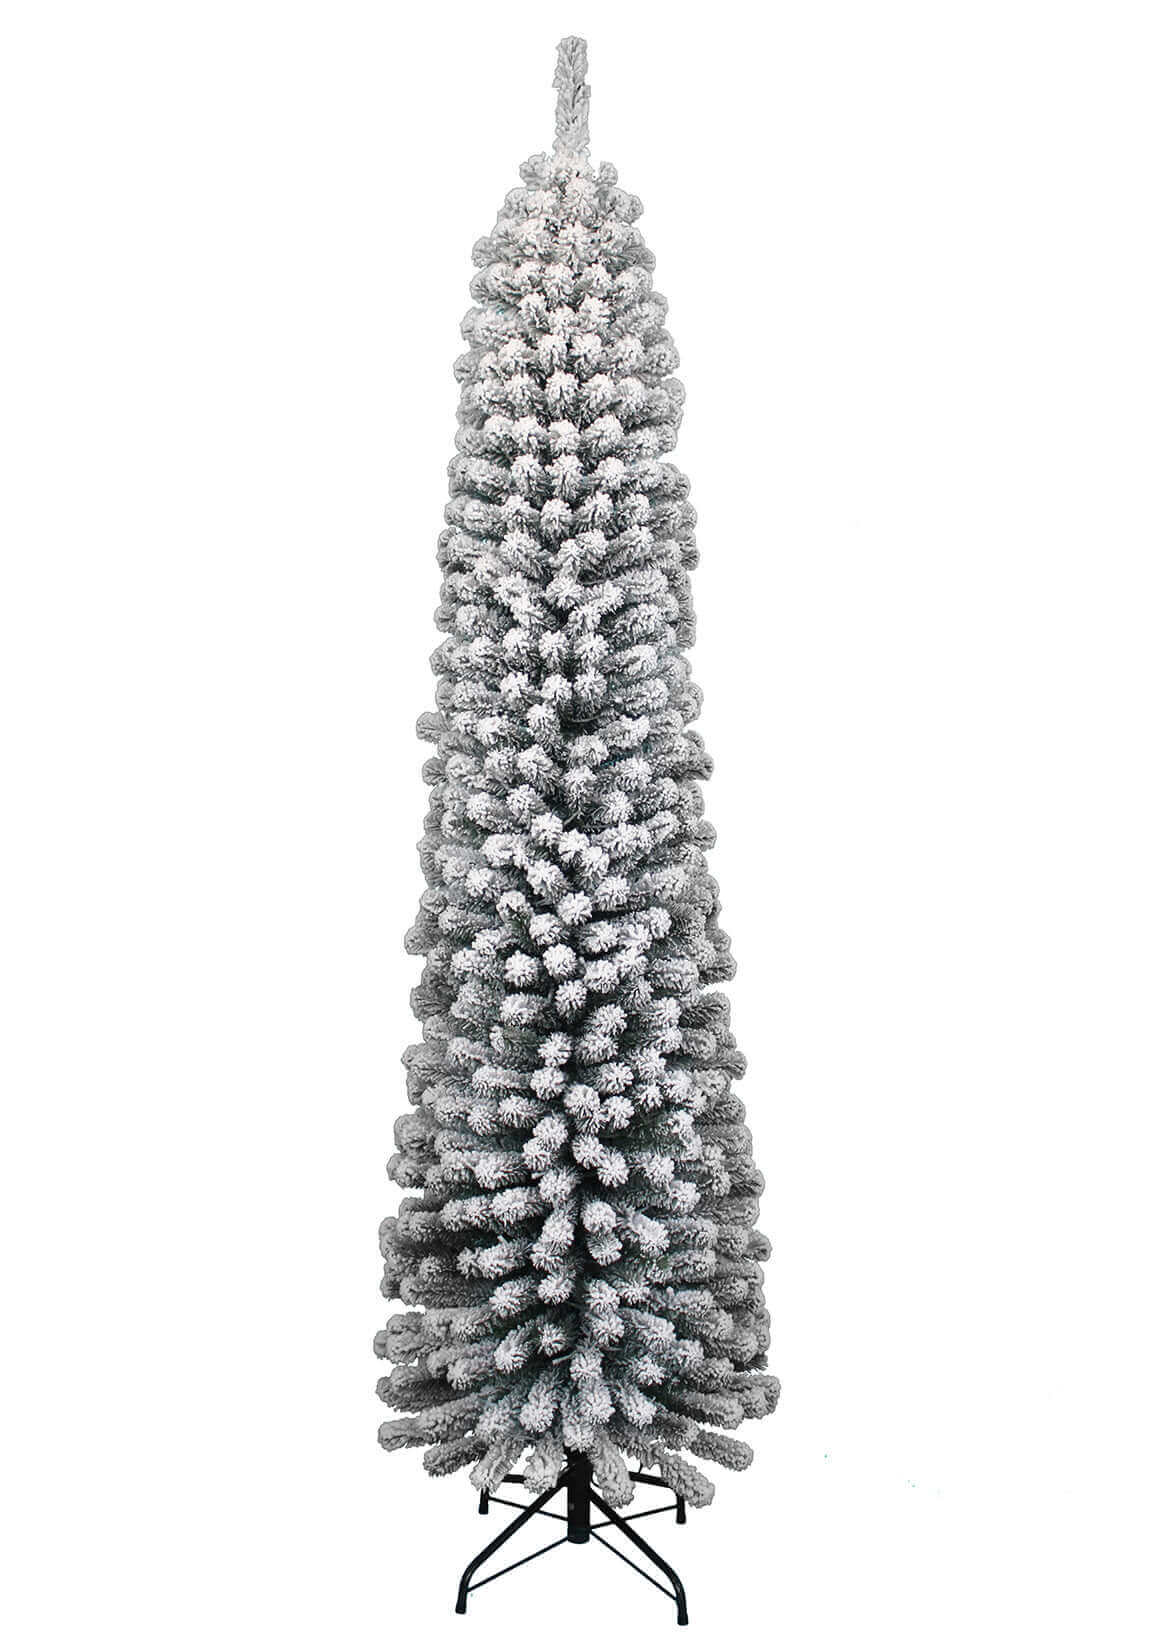 King of Christmas 8' Prince Flock Pencil Artificial Christmas Tree with 300 Warm White LED Lights